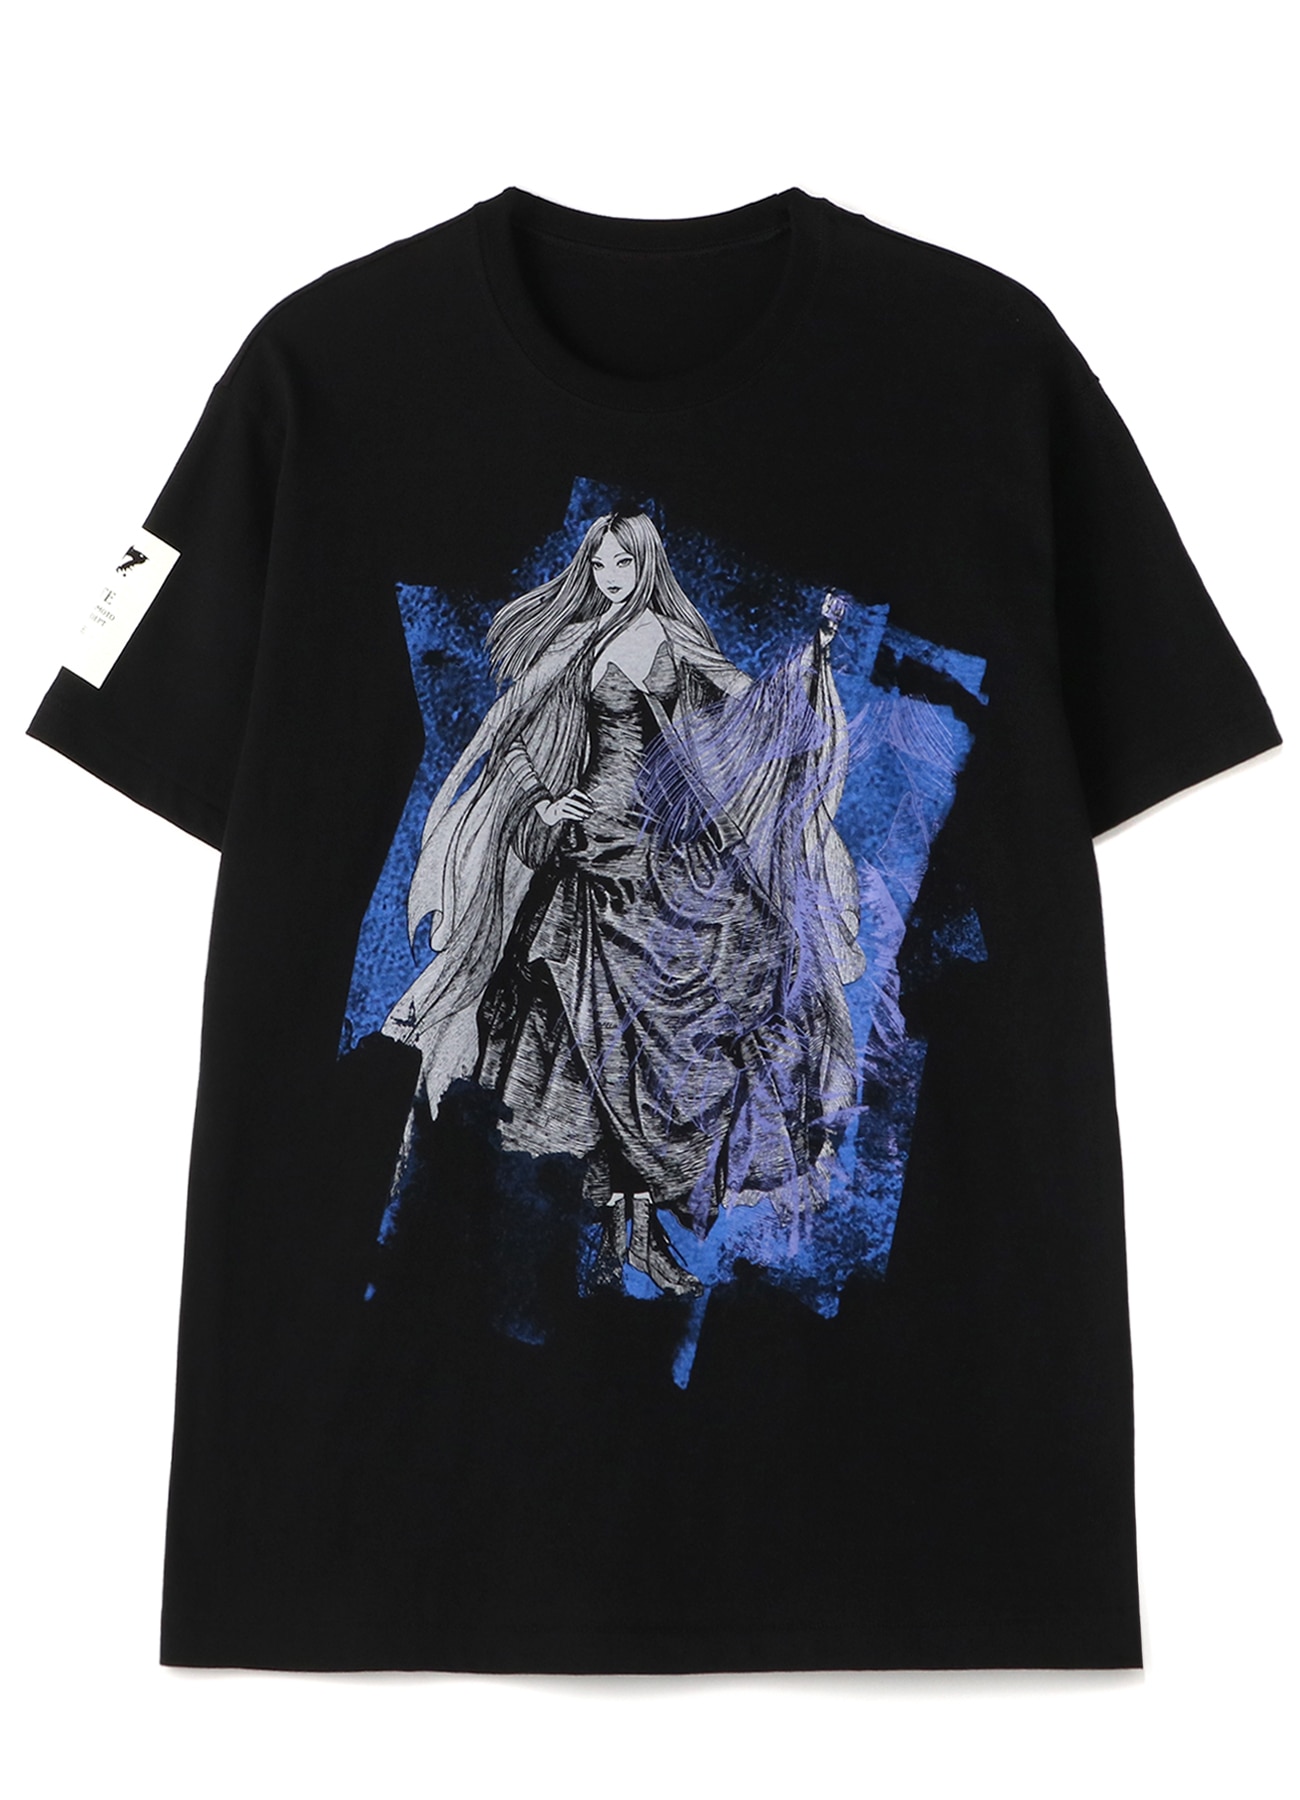 S'YTE × Junji ITO COLLABORATION “TOMIE” T-SHIRTS COLLECTION 